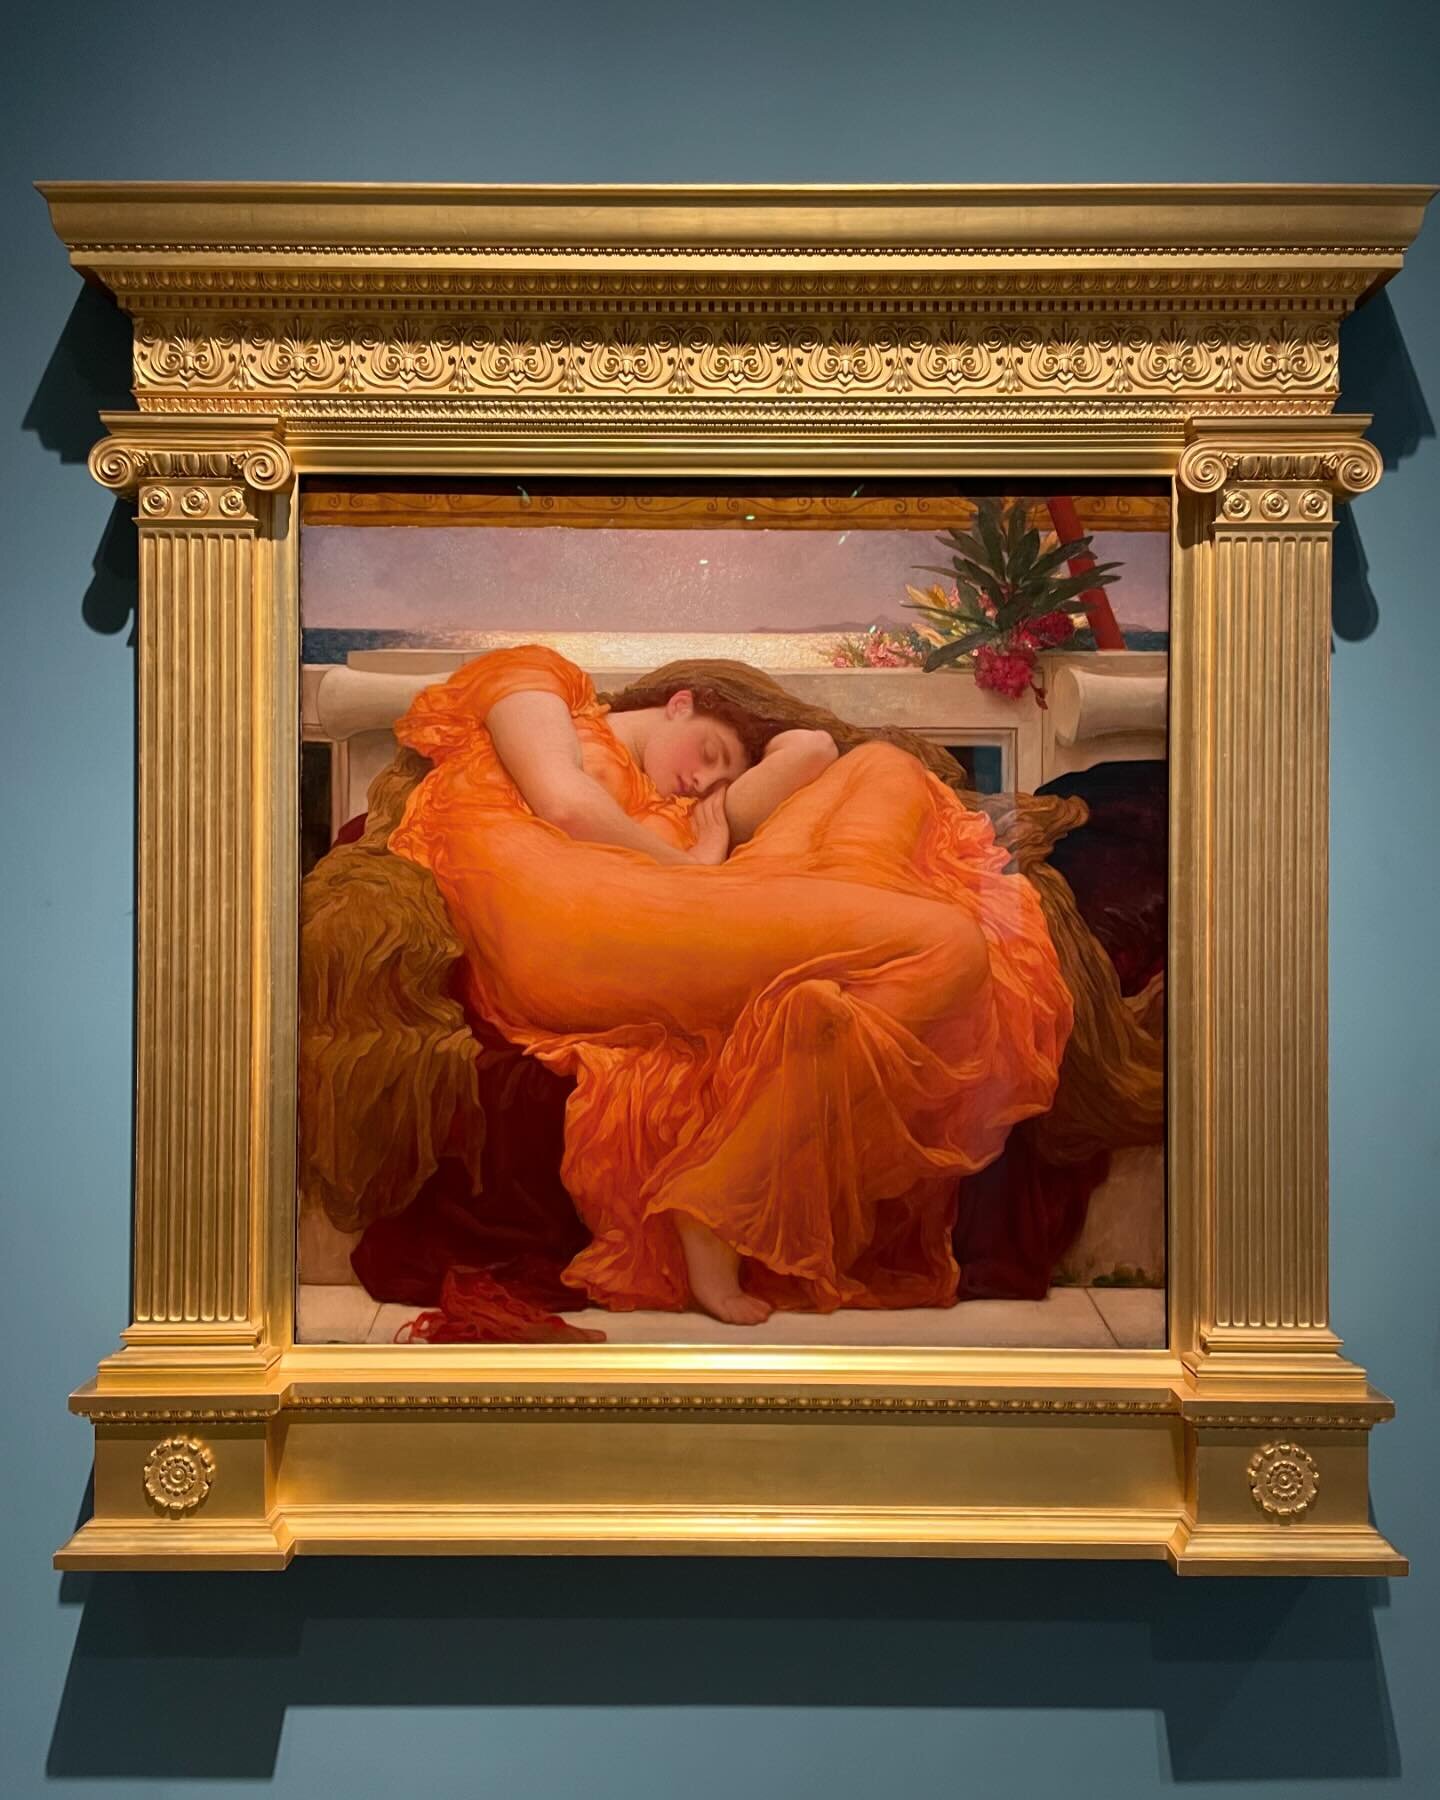 I know I&rsquo;ve posted about Flaming June before, but there is some exciting news - for the first time in 125 years, she is back at the Royal Academy in London! Usually the painting is held at an art museum in Puerto Rico, so if you&rsquo;d like to